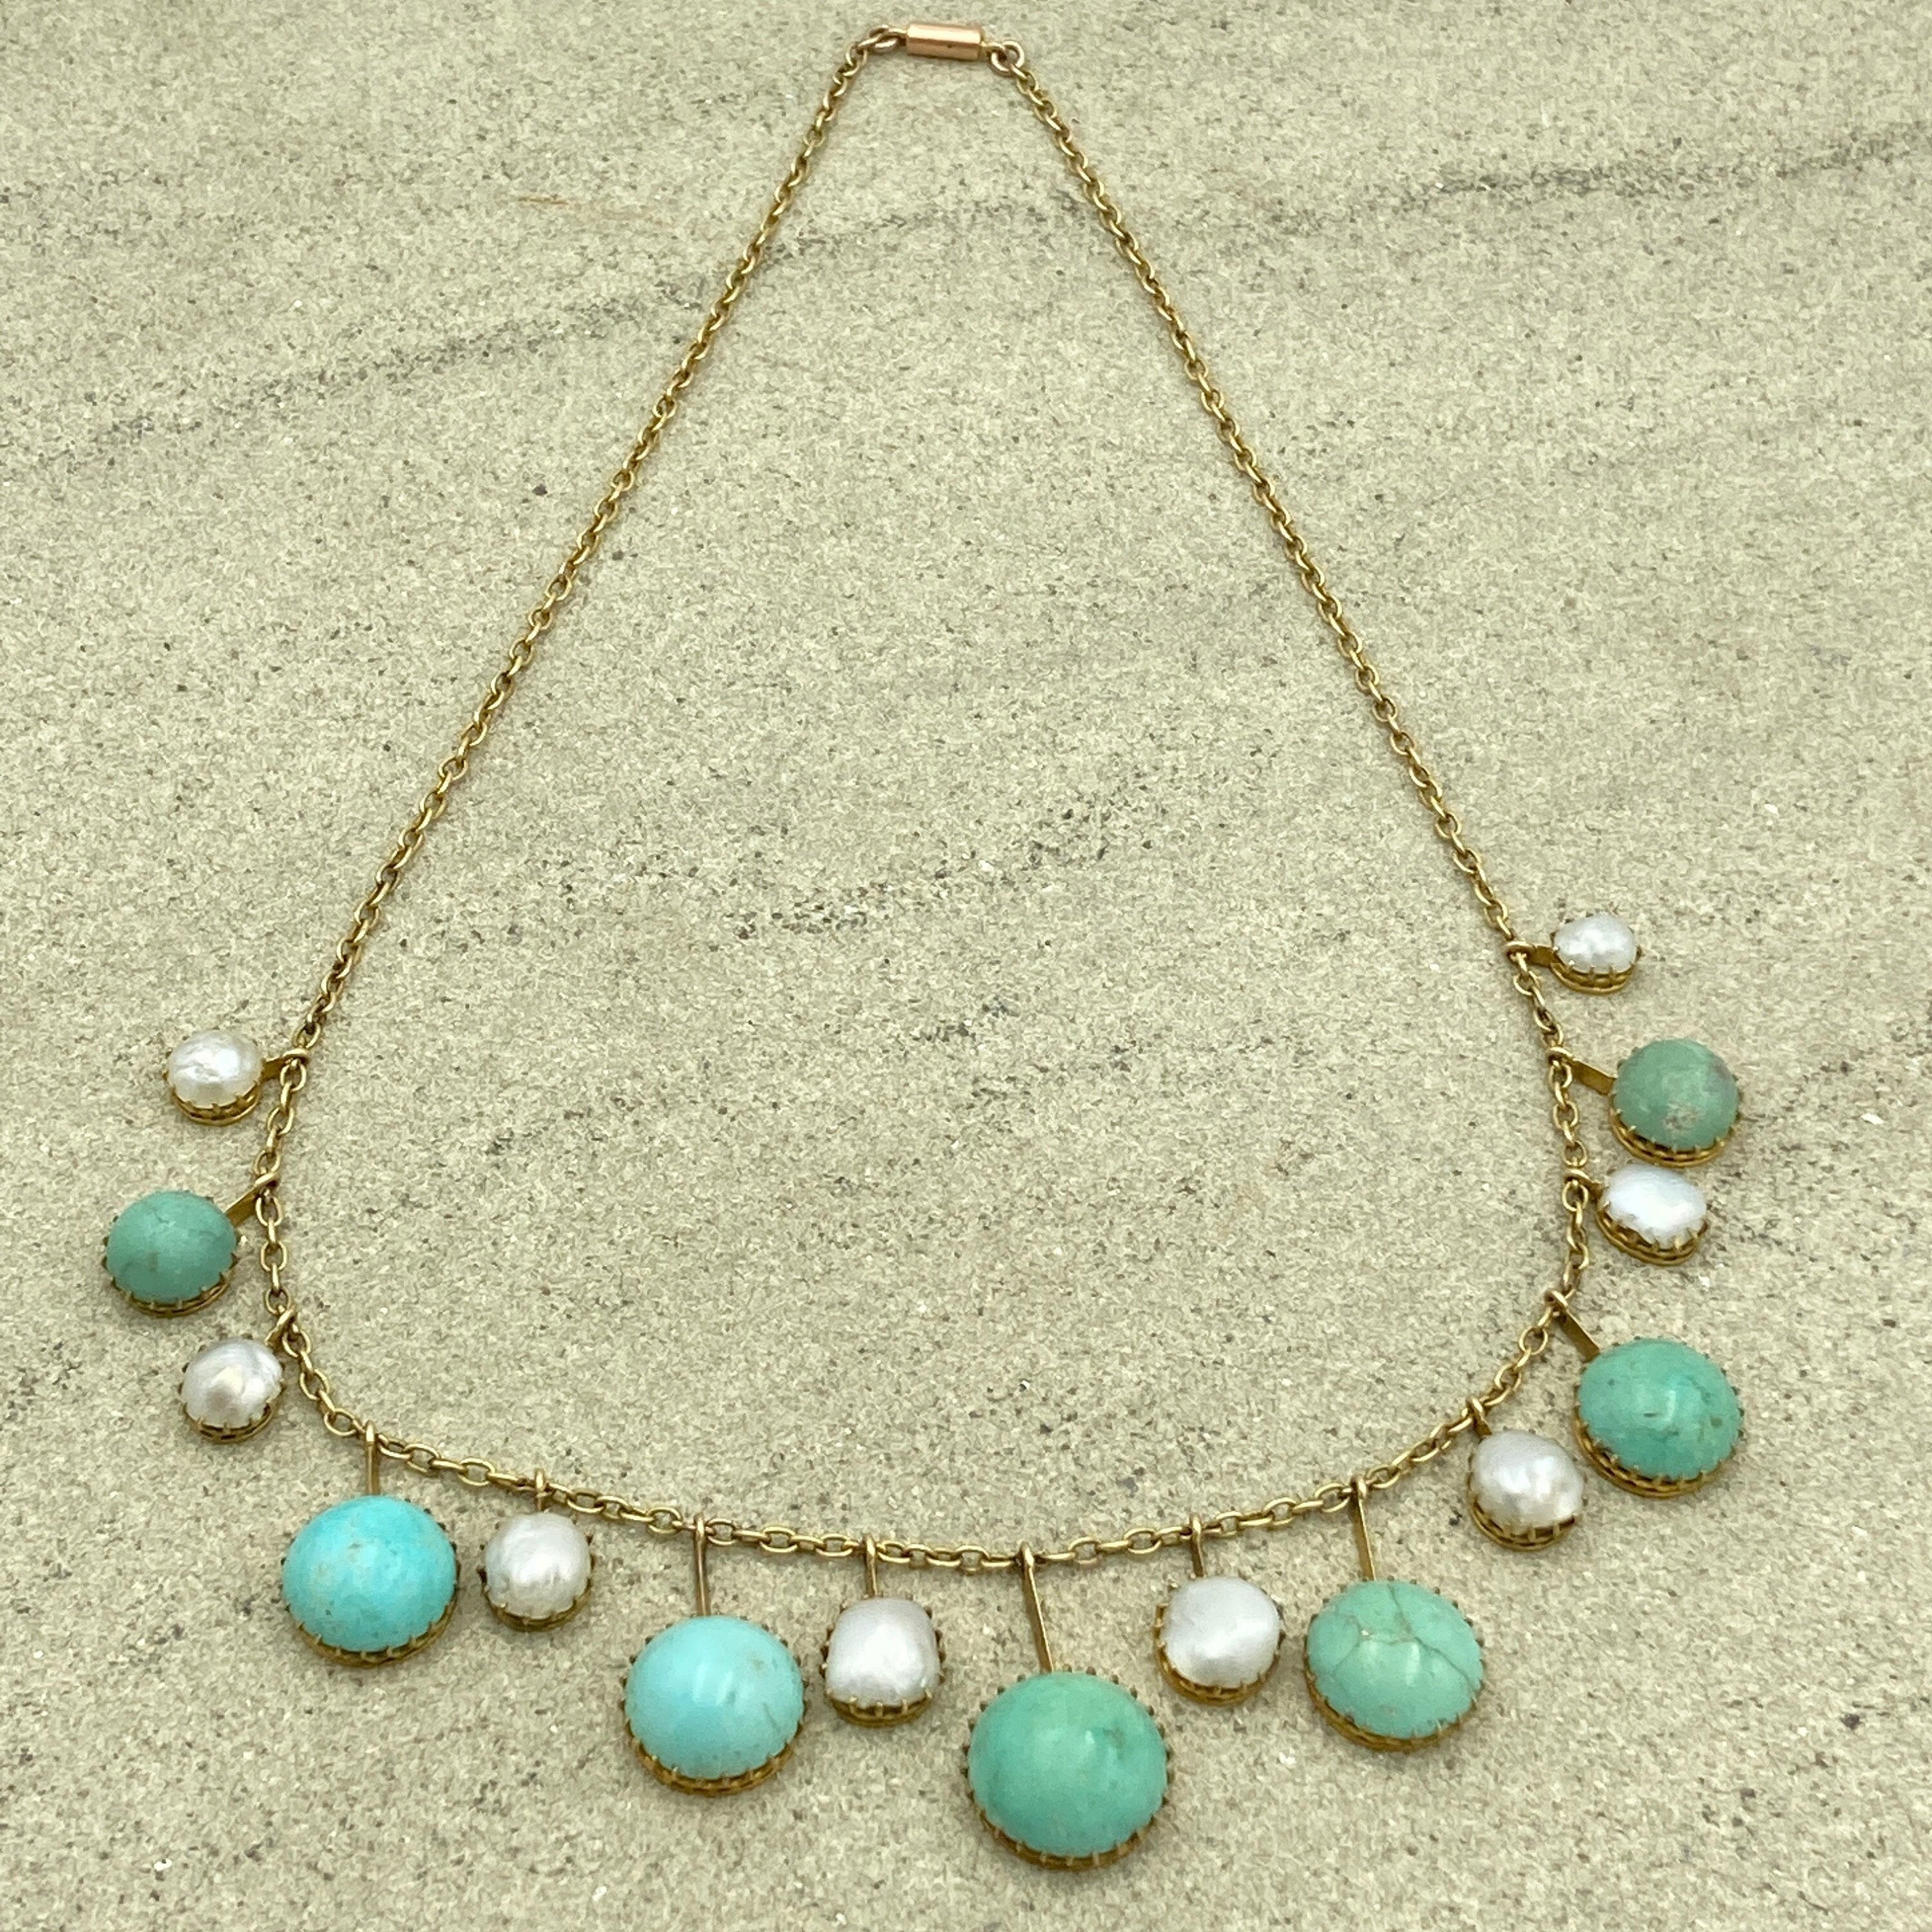 Edwardian 9ct gold arts & crafts fringe necklace, with baroque split pearls and natural turquoise